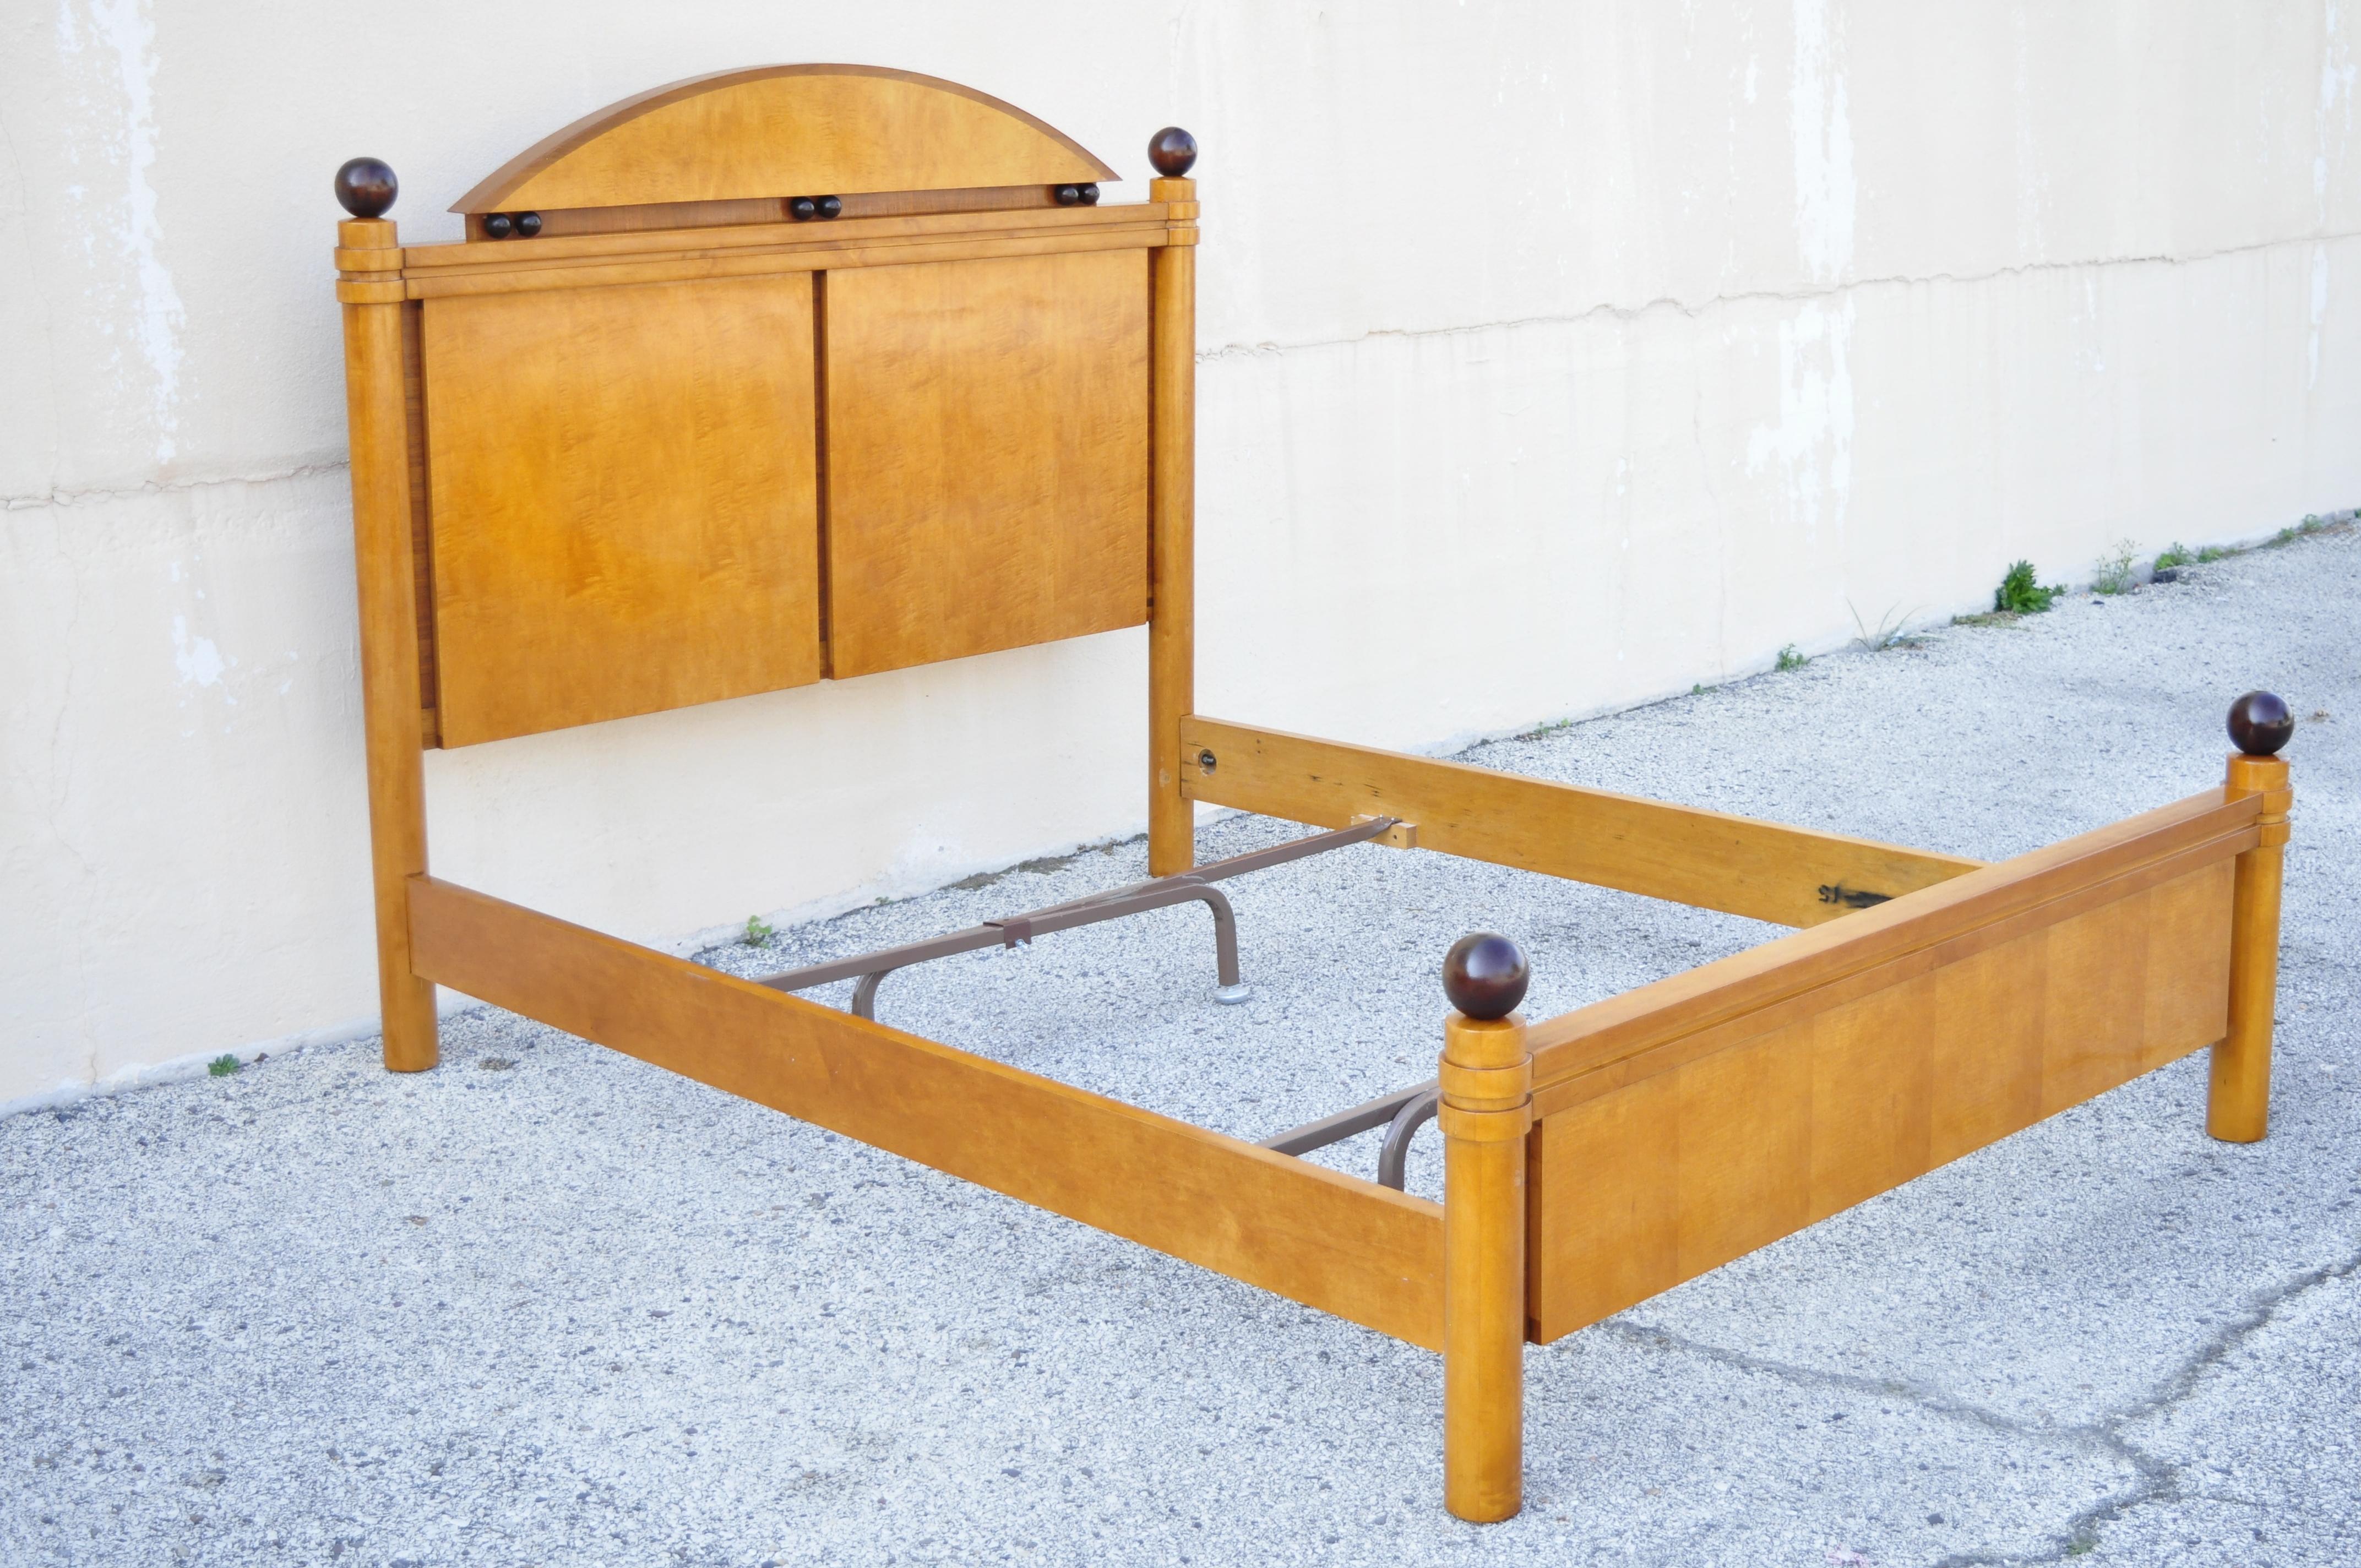 Drexel Art Deco queen size carmel finish wooden bed frame. Item features queen size frame, solid wood construction, beautiful wood grain, nicely carved details, very nice item, quality American craftsmanship, great style and form. Circa late 20th